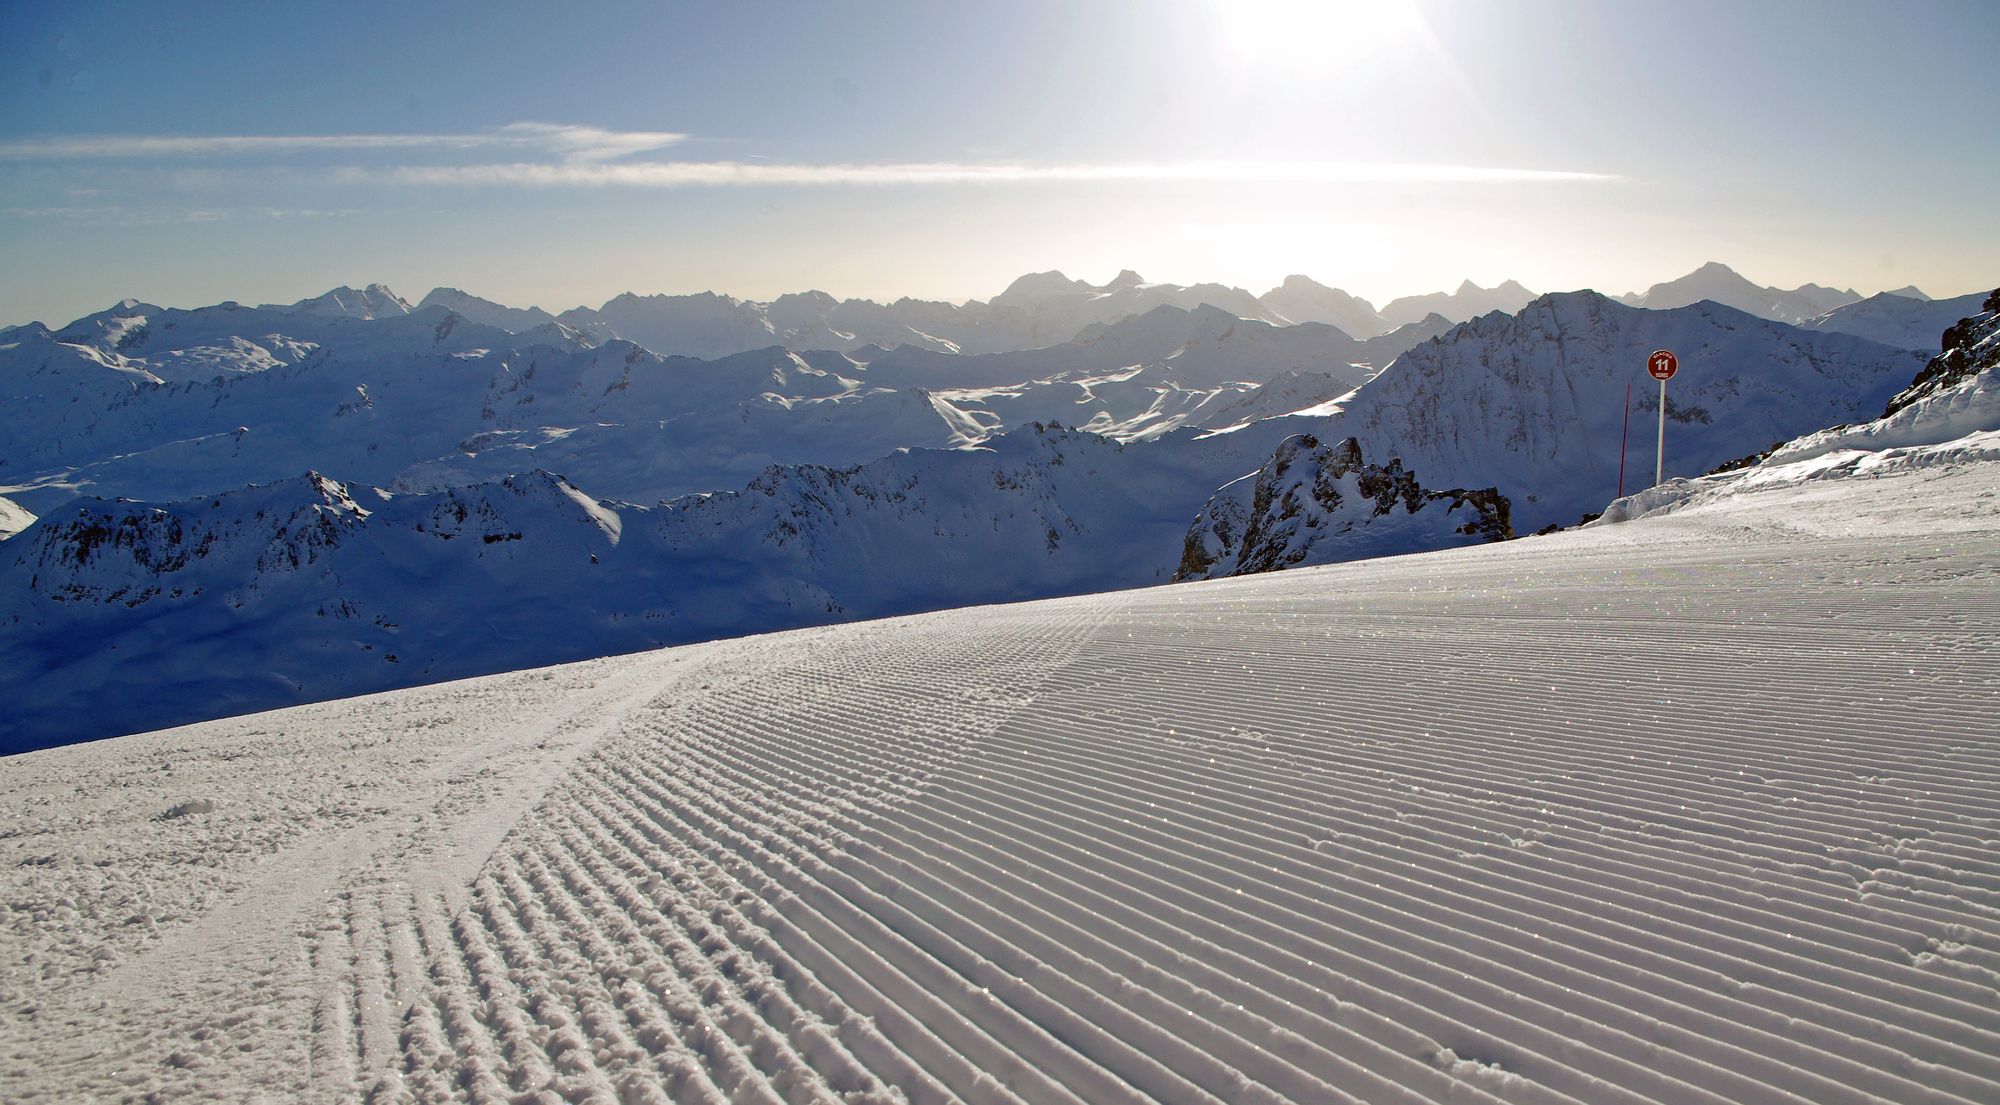 Treat yourself to the most beautiful snows in France, as a family